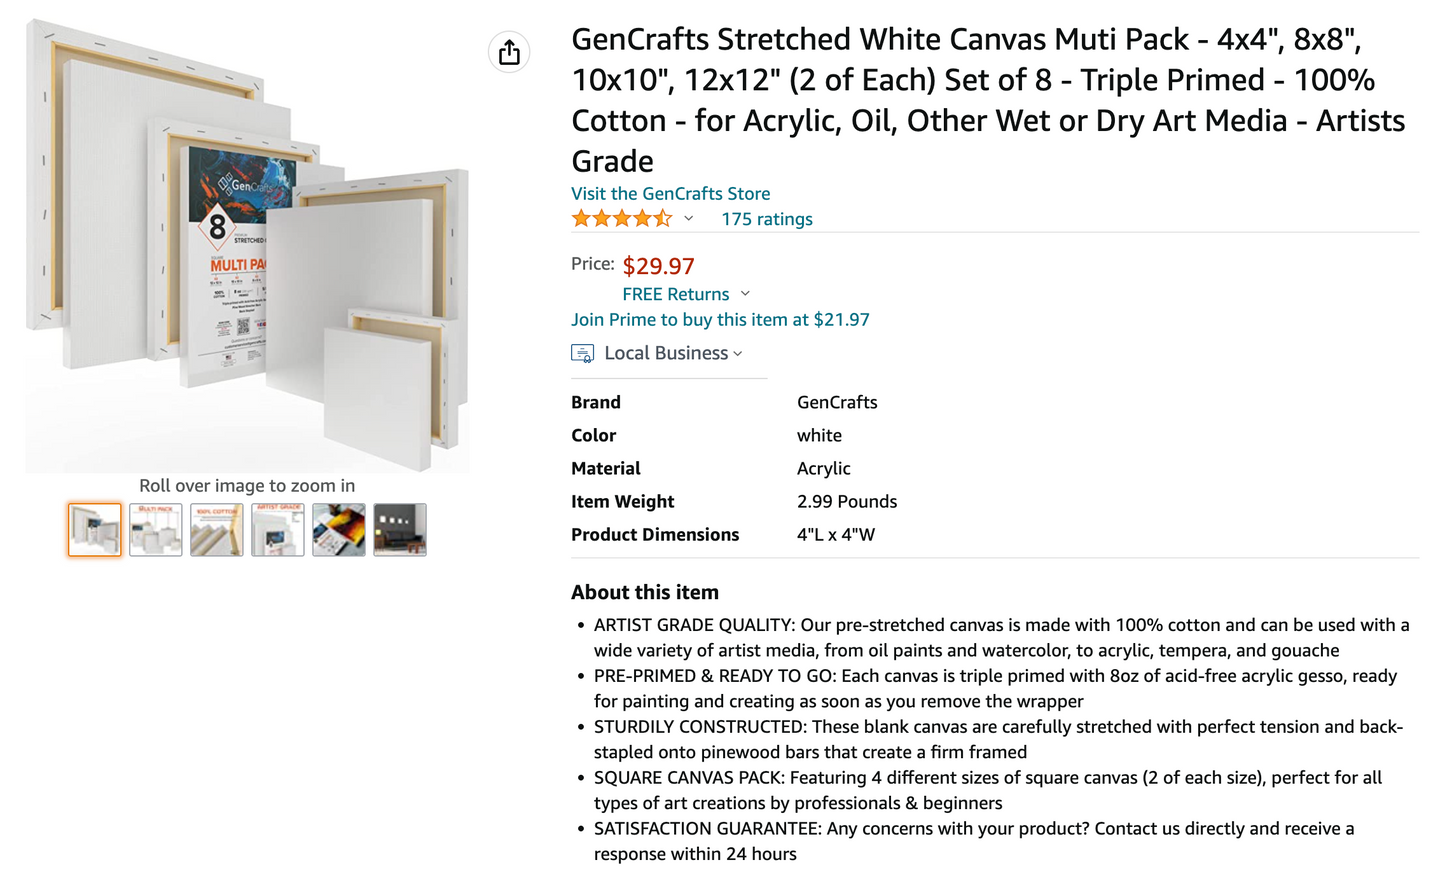 Stretched White Canvas Muti Pack by GenCrafts - Square - [SKU: CCS8]